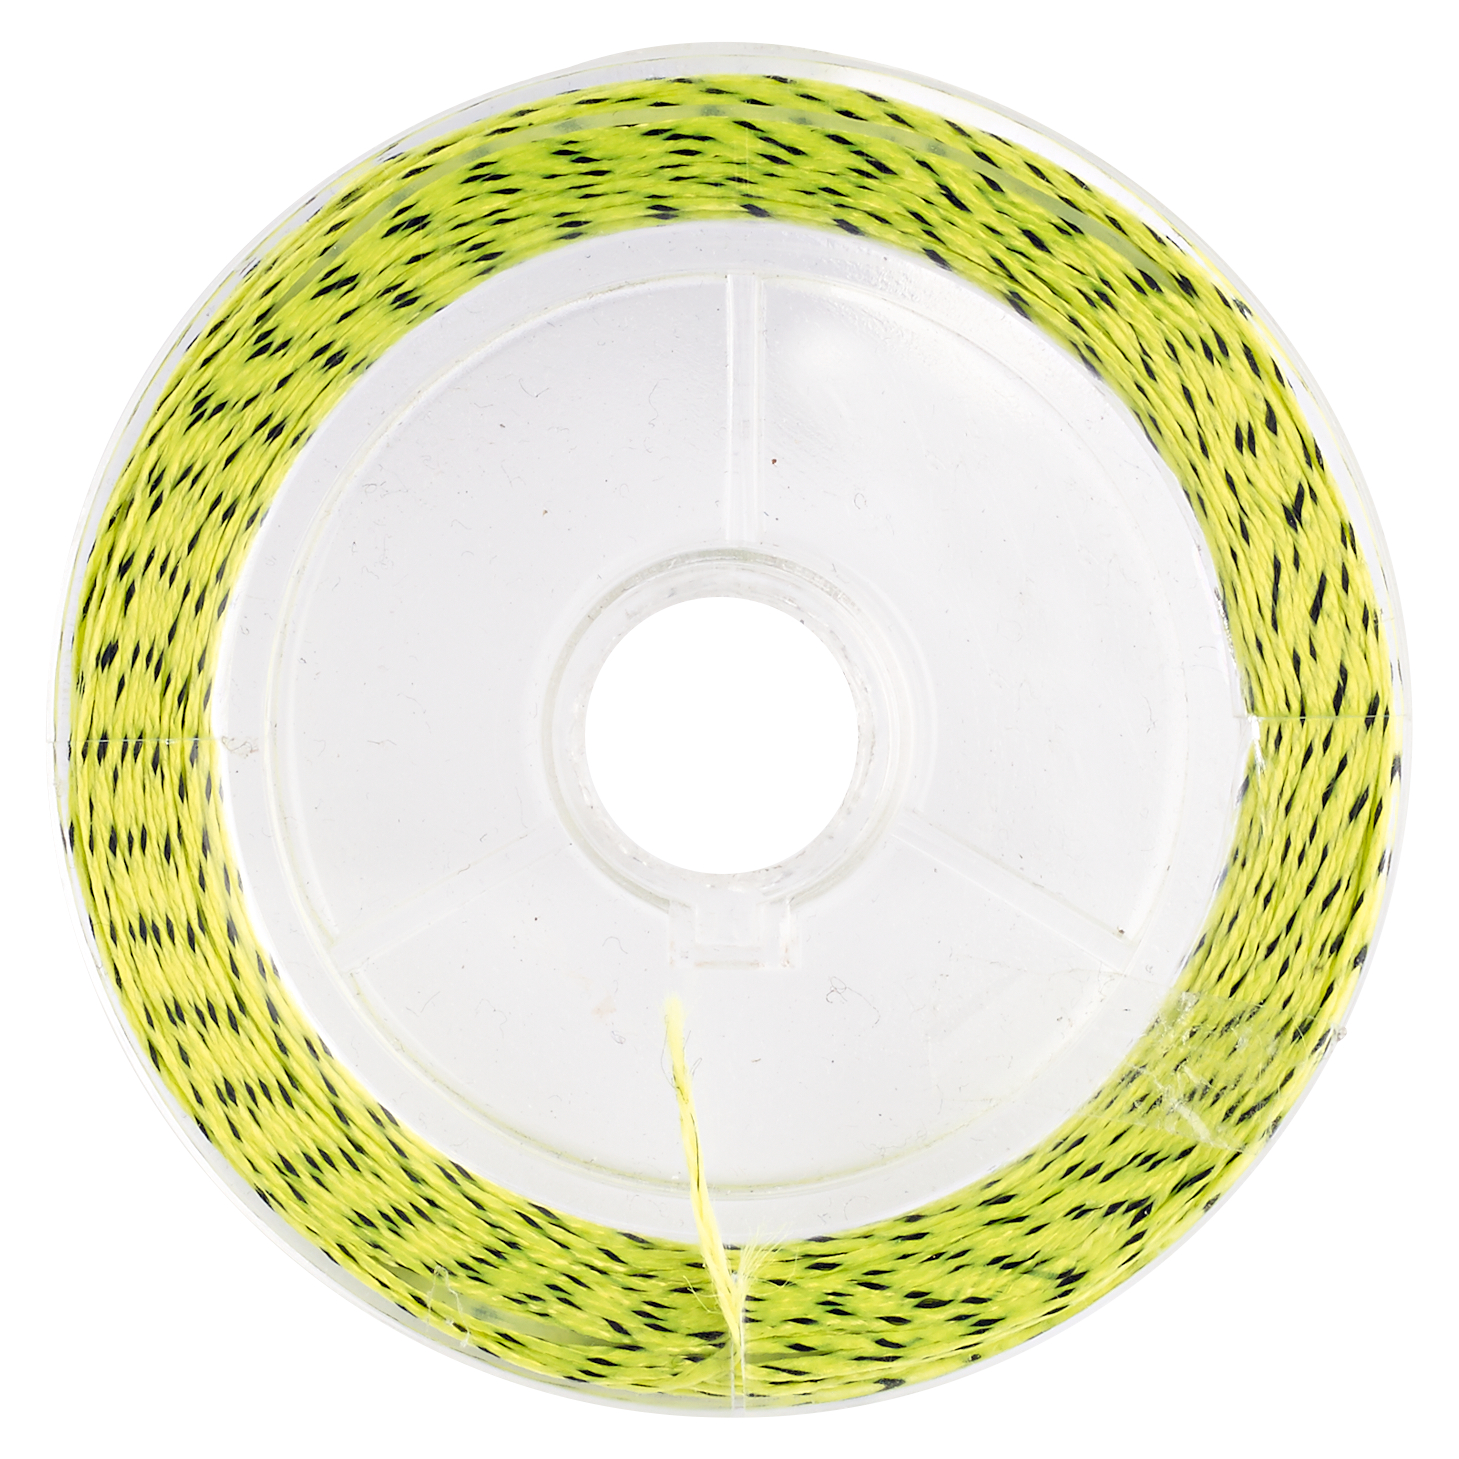 Kogha Fly Fishing Line Backing f. (black/yellow, 90 m) at low